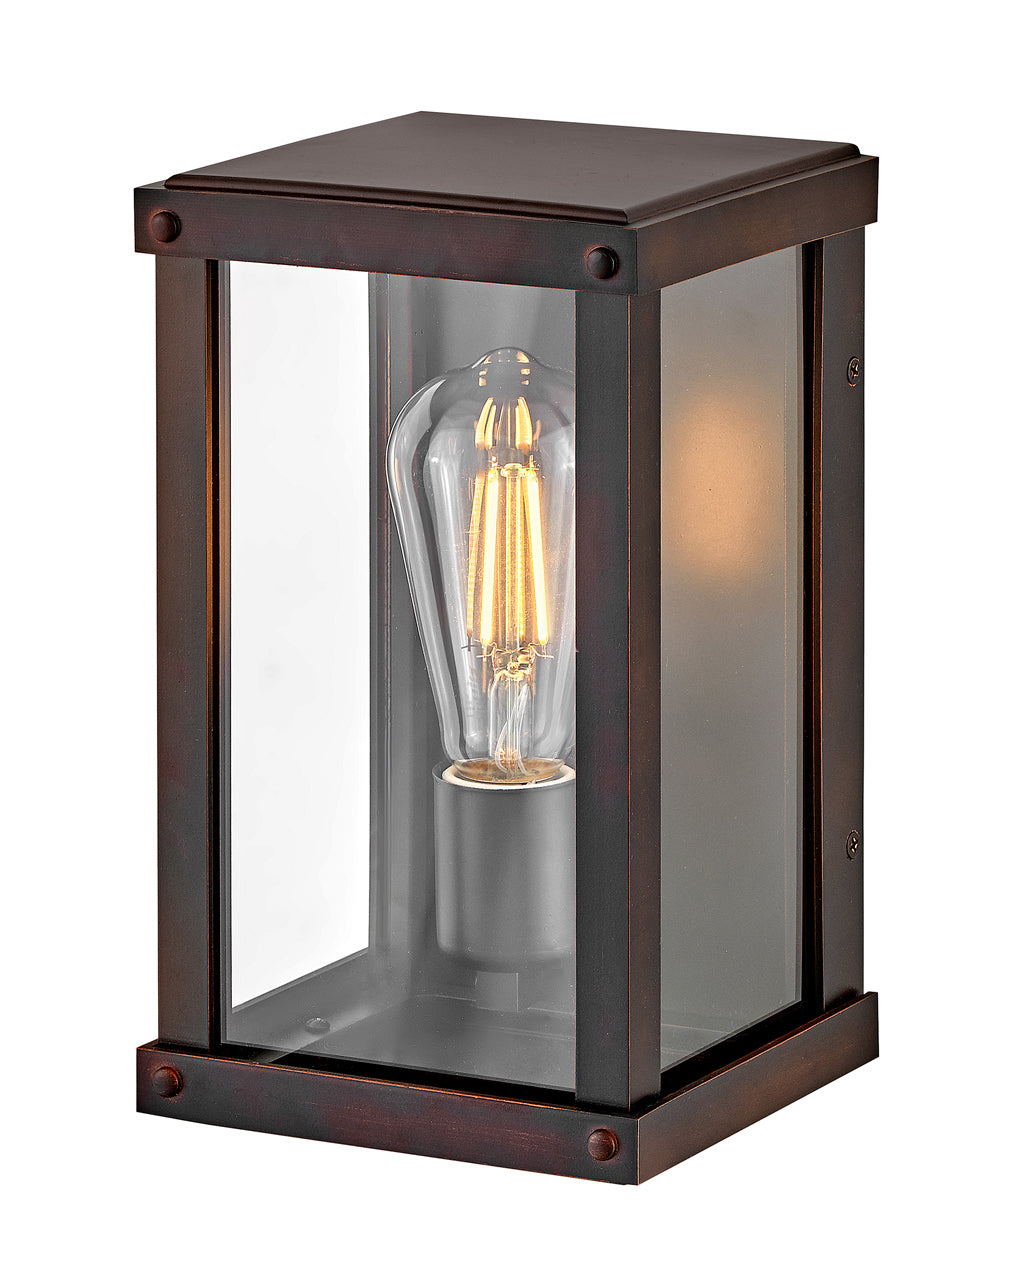 OUTDOOR BECKHAM Small Wall Mount Lantern Outdoor l Wall Hinkley Blackened Copper 5.5x6.0x10.0 